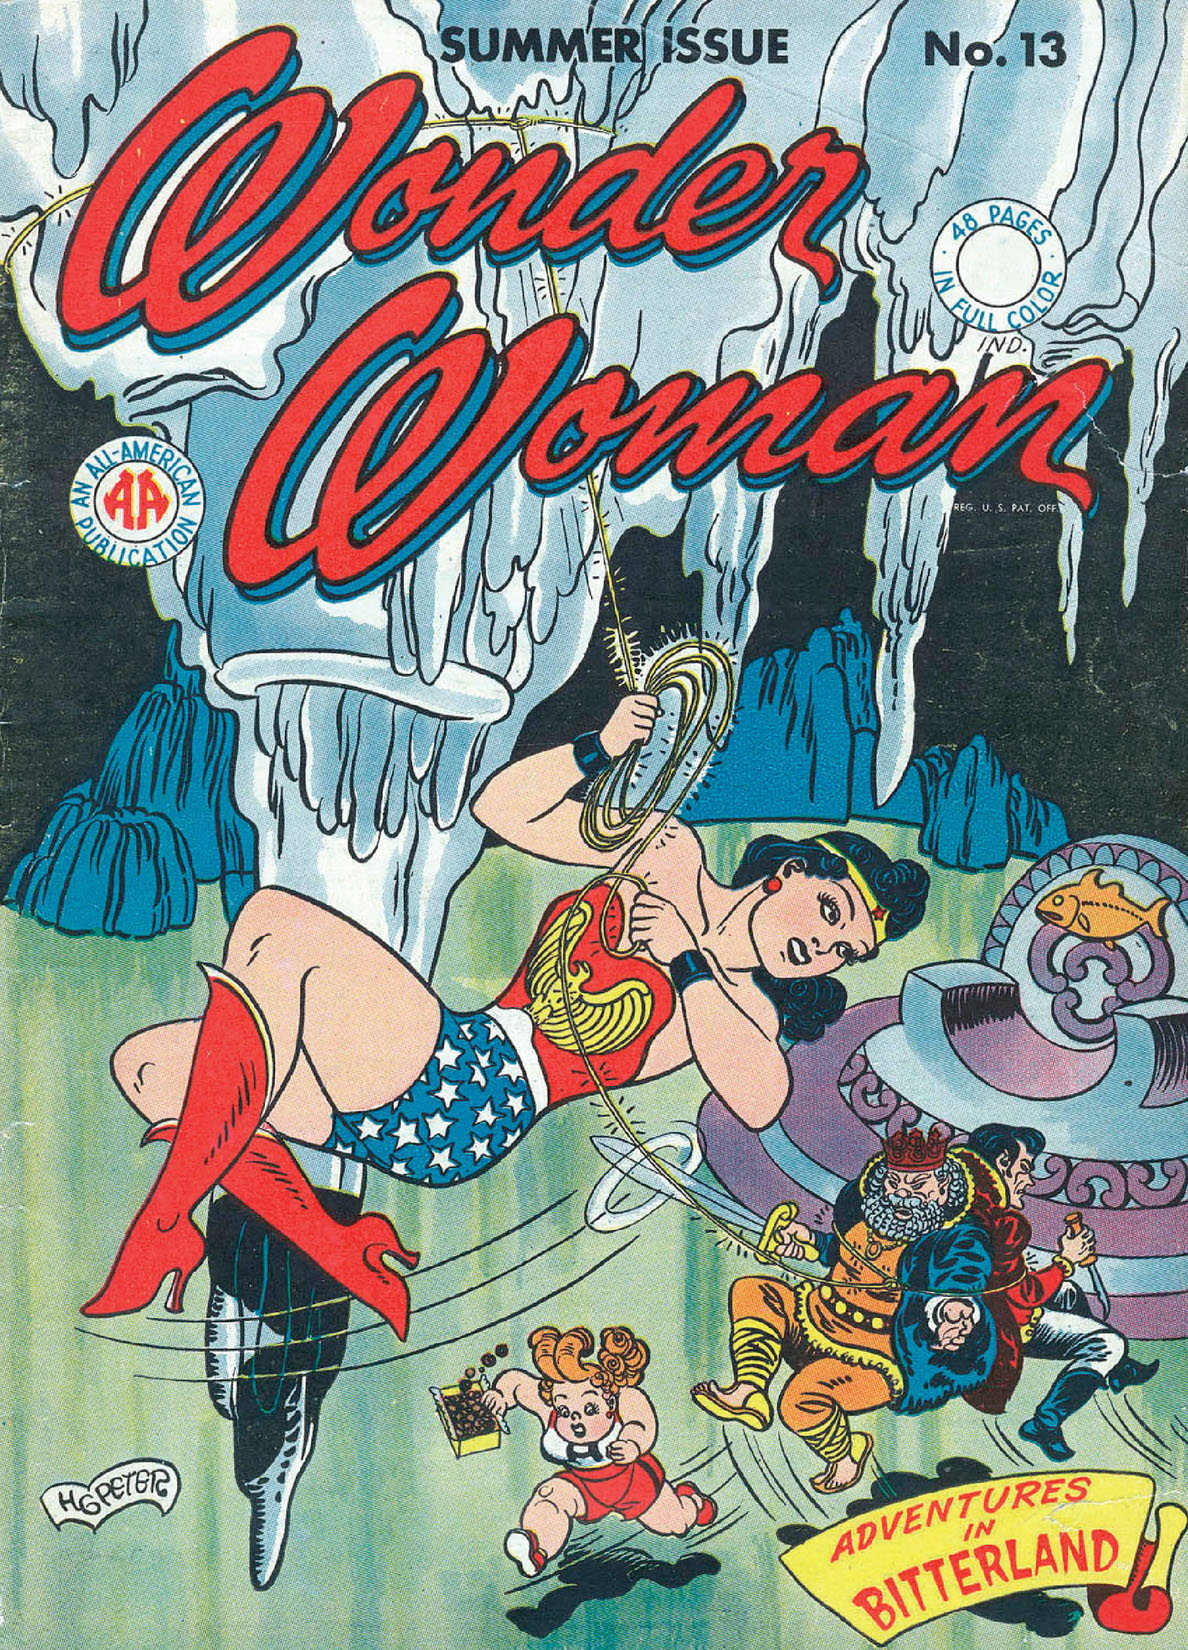 Wonder Woman (1942-) #13 preview images